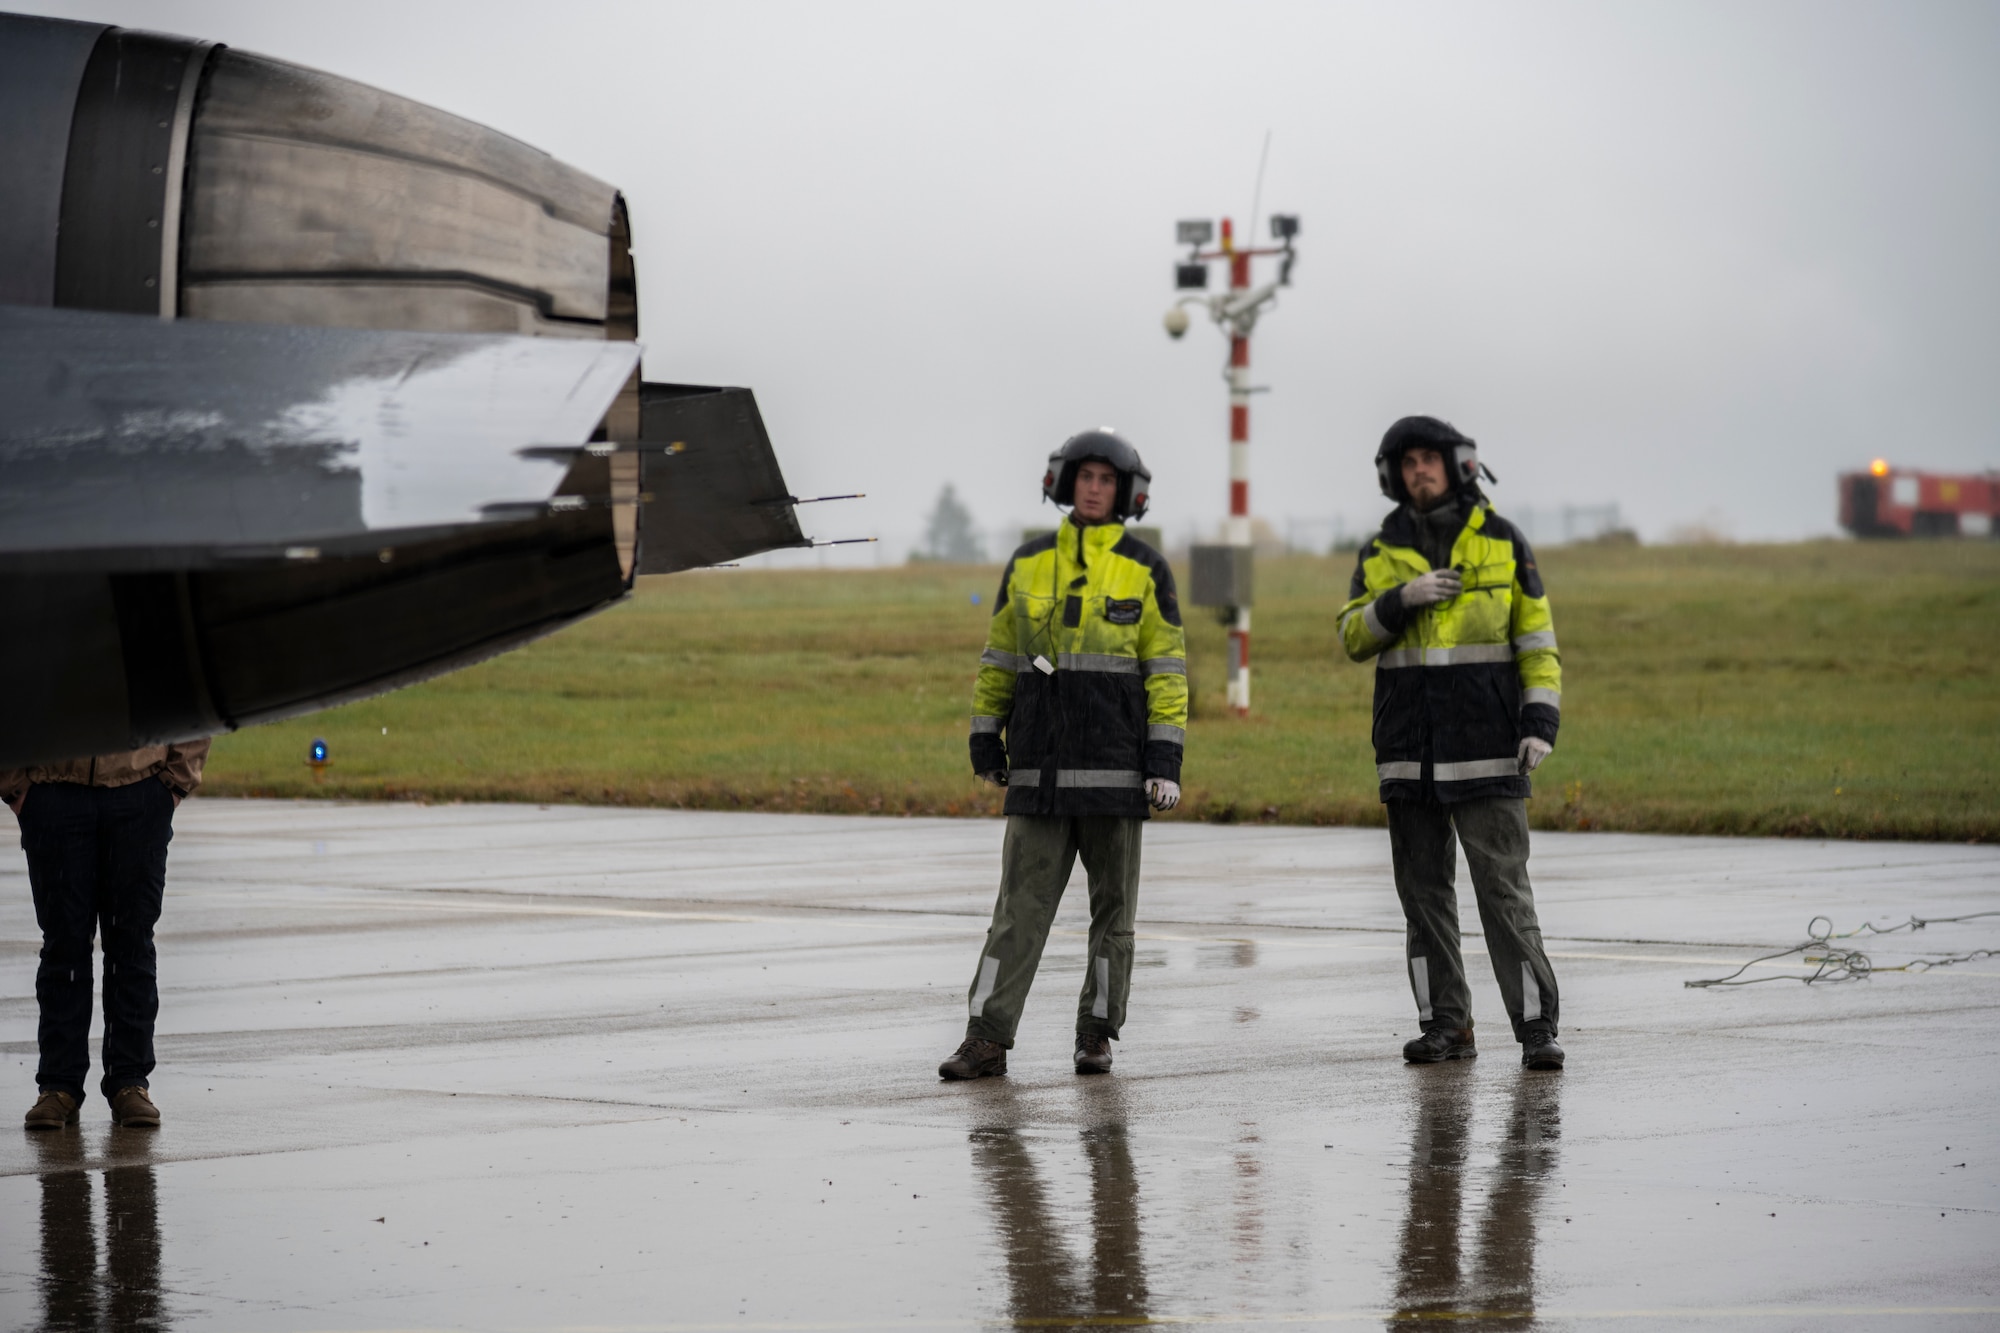 Two German Air Force aircraft maintainers prepare to launch a U.S. Air Force F-16C Fighting Falcon fighter jet during an Agile Combat Employment exercise at Büchel Air Base, Germany, Nov. 3, 2021. ACE is a concept of operations that envisions the use of agile operations to generate resilient airpower in a contested environment, thus enhancing our ability to deter, defend and win across the spectrum of conflict. (U.S. Air Force photo by Senior Airman Ali Stewart)